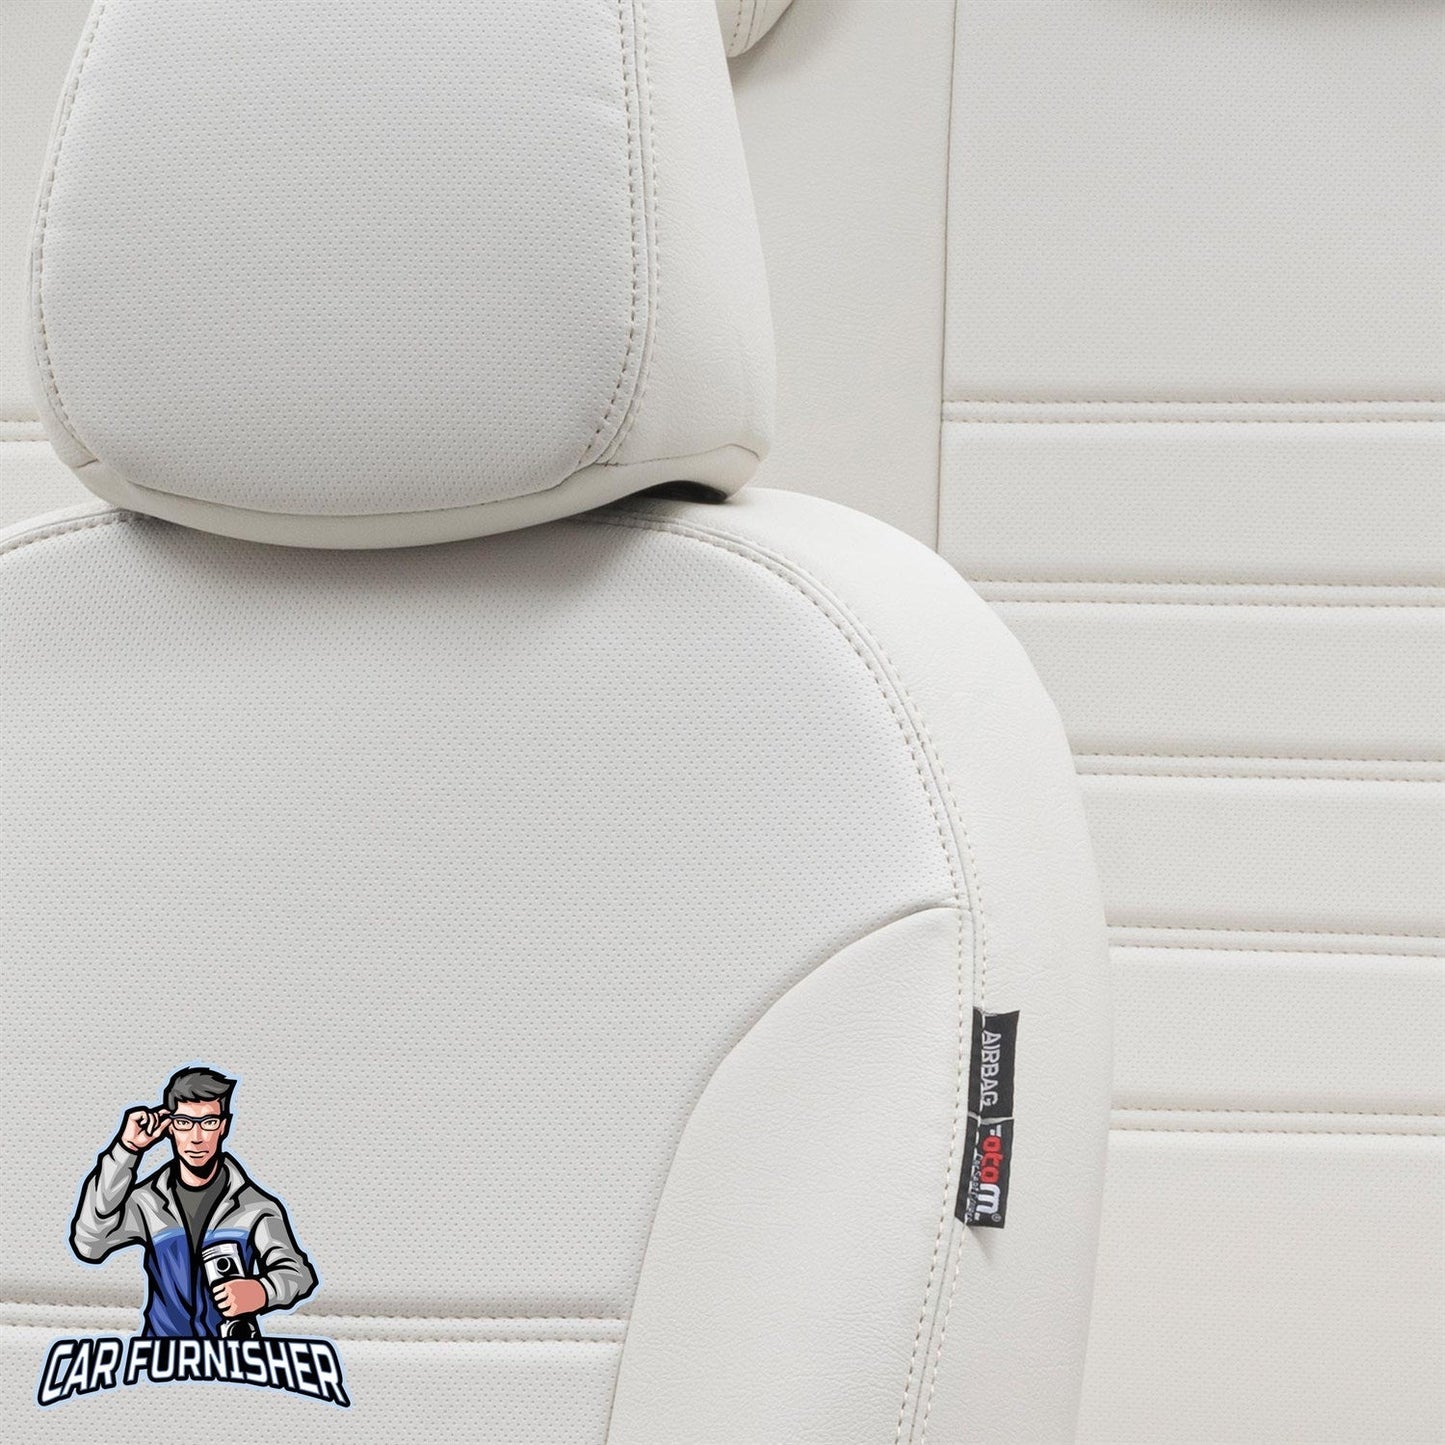 Skoda Kodiaq Seat Covers Istanbul Leather Design Ivory Leather